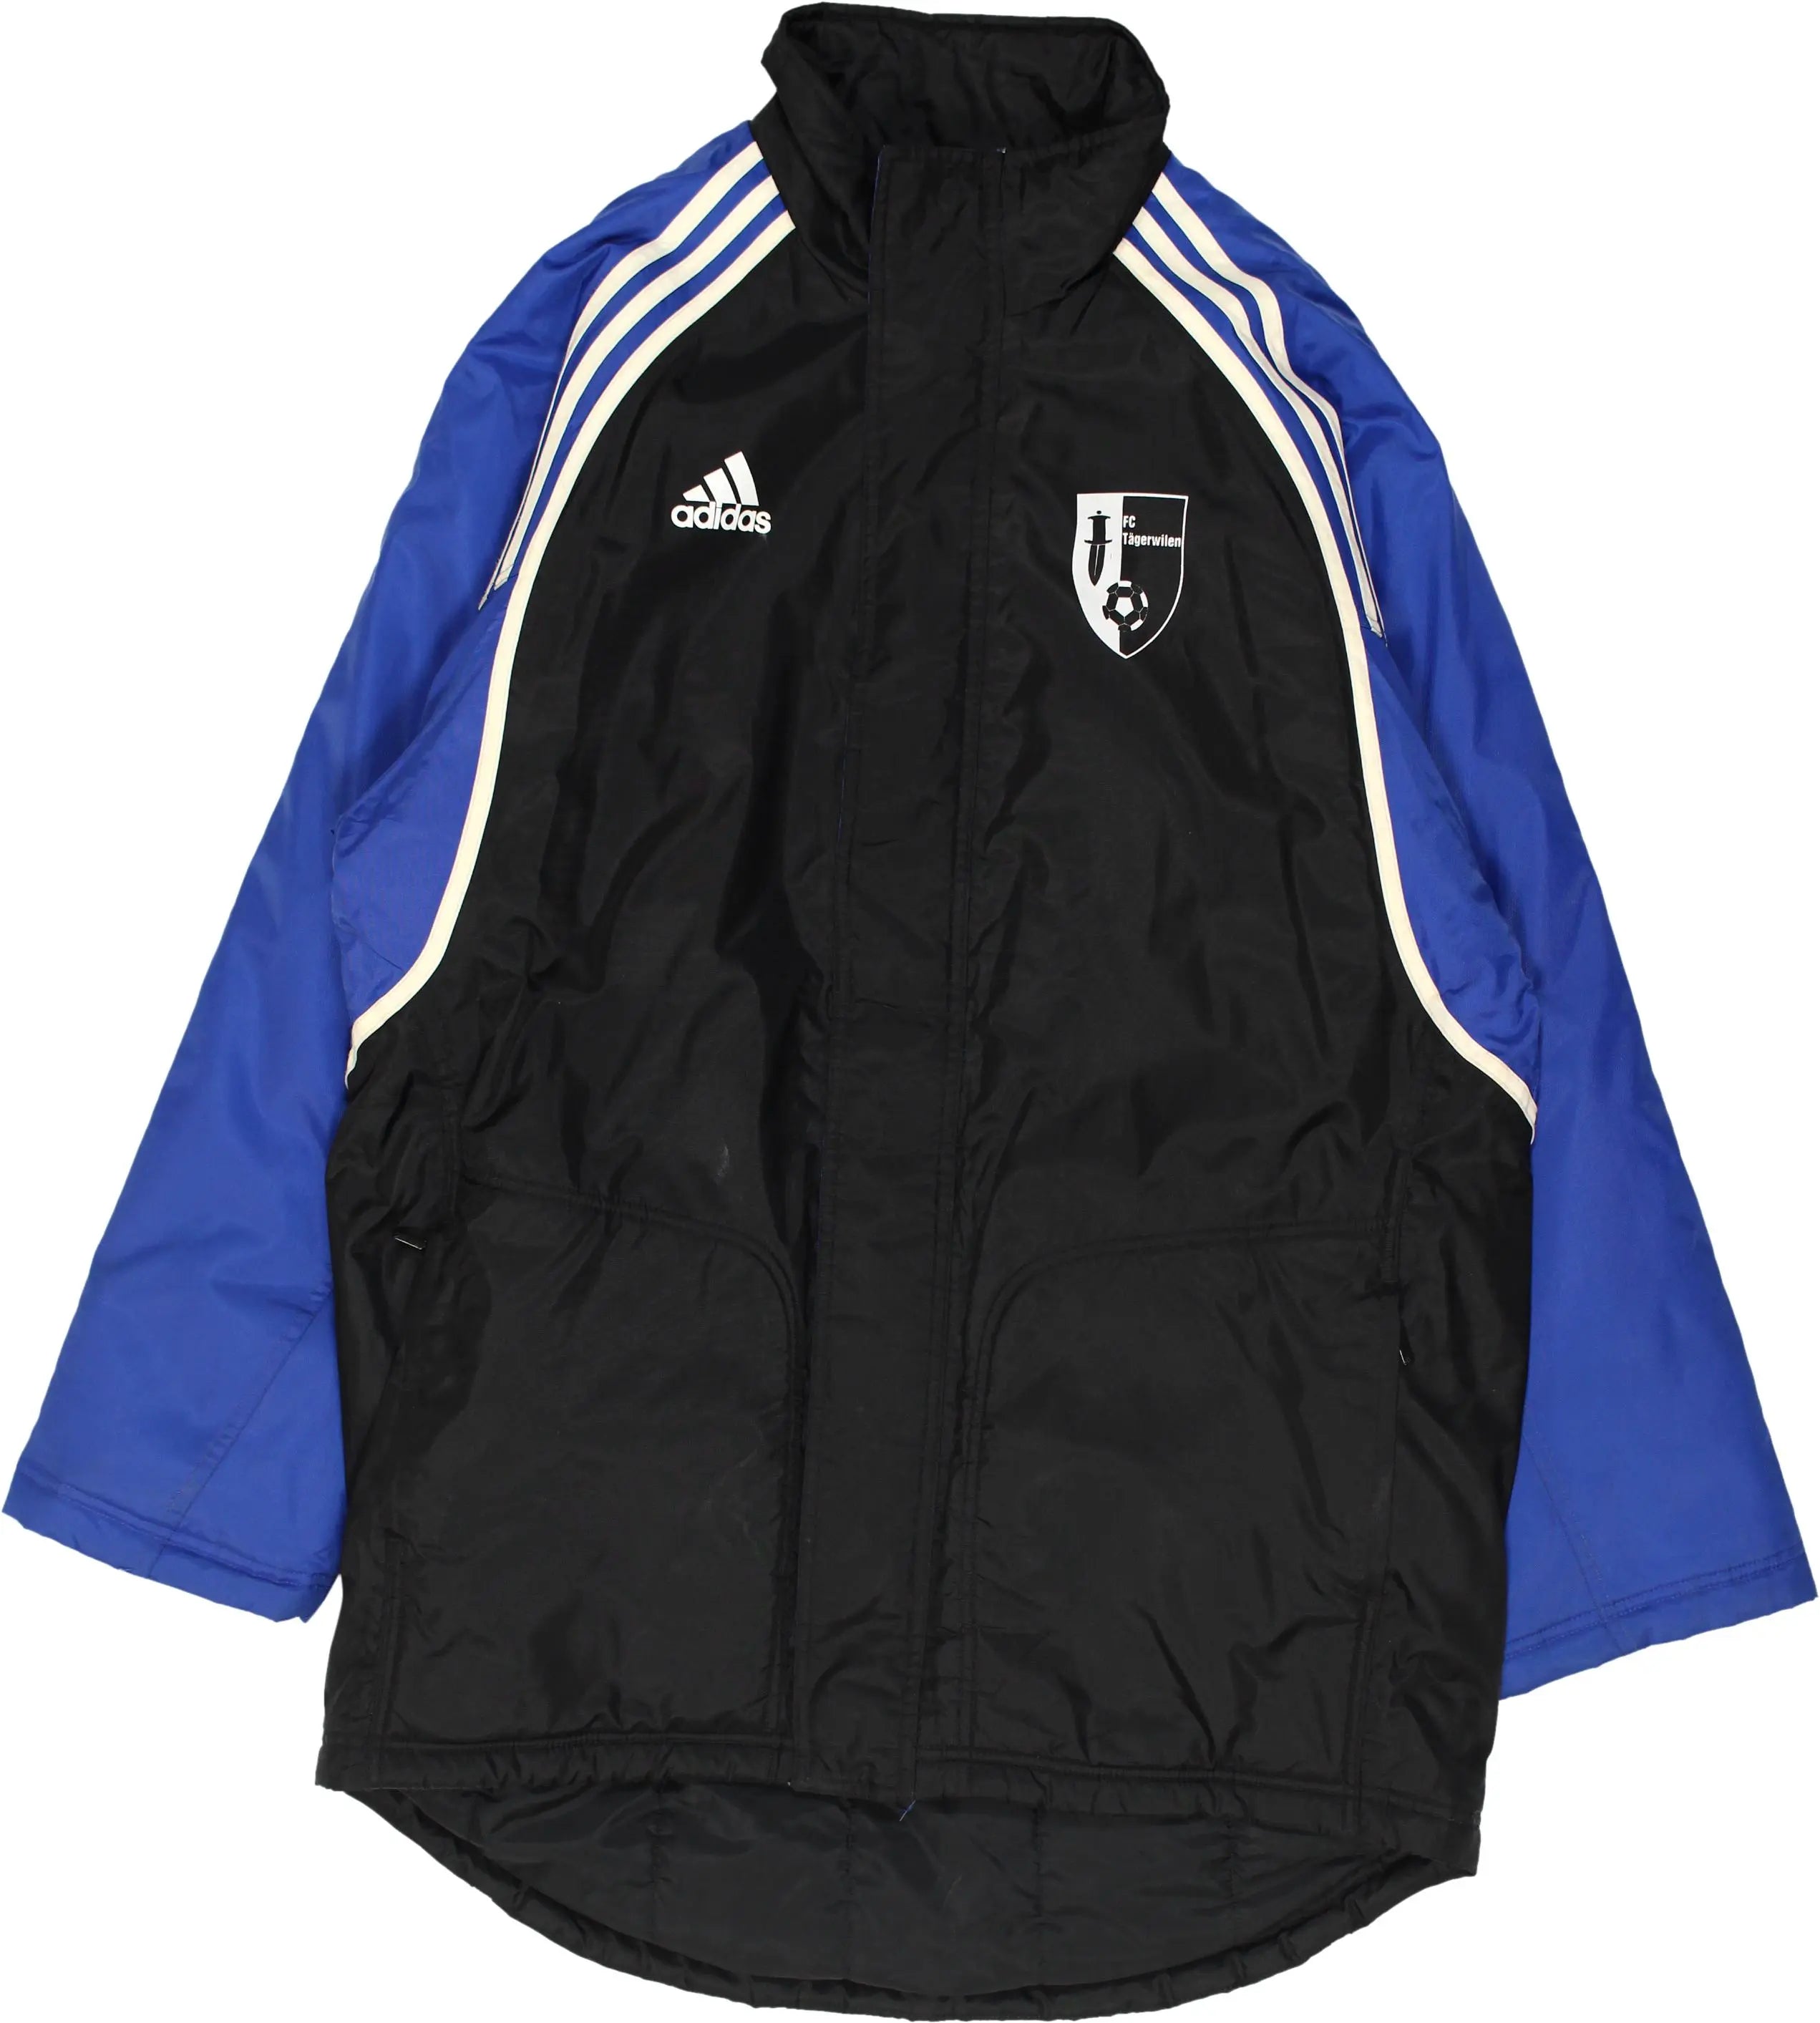 Adidas - 00s Jacket- ThriftTale.com - Vintage and second handclothing